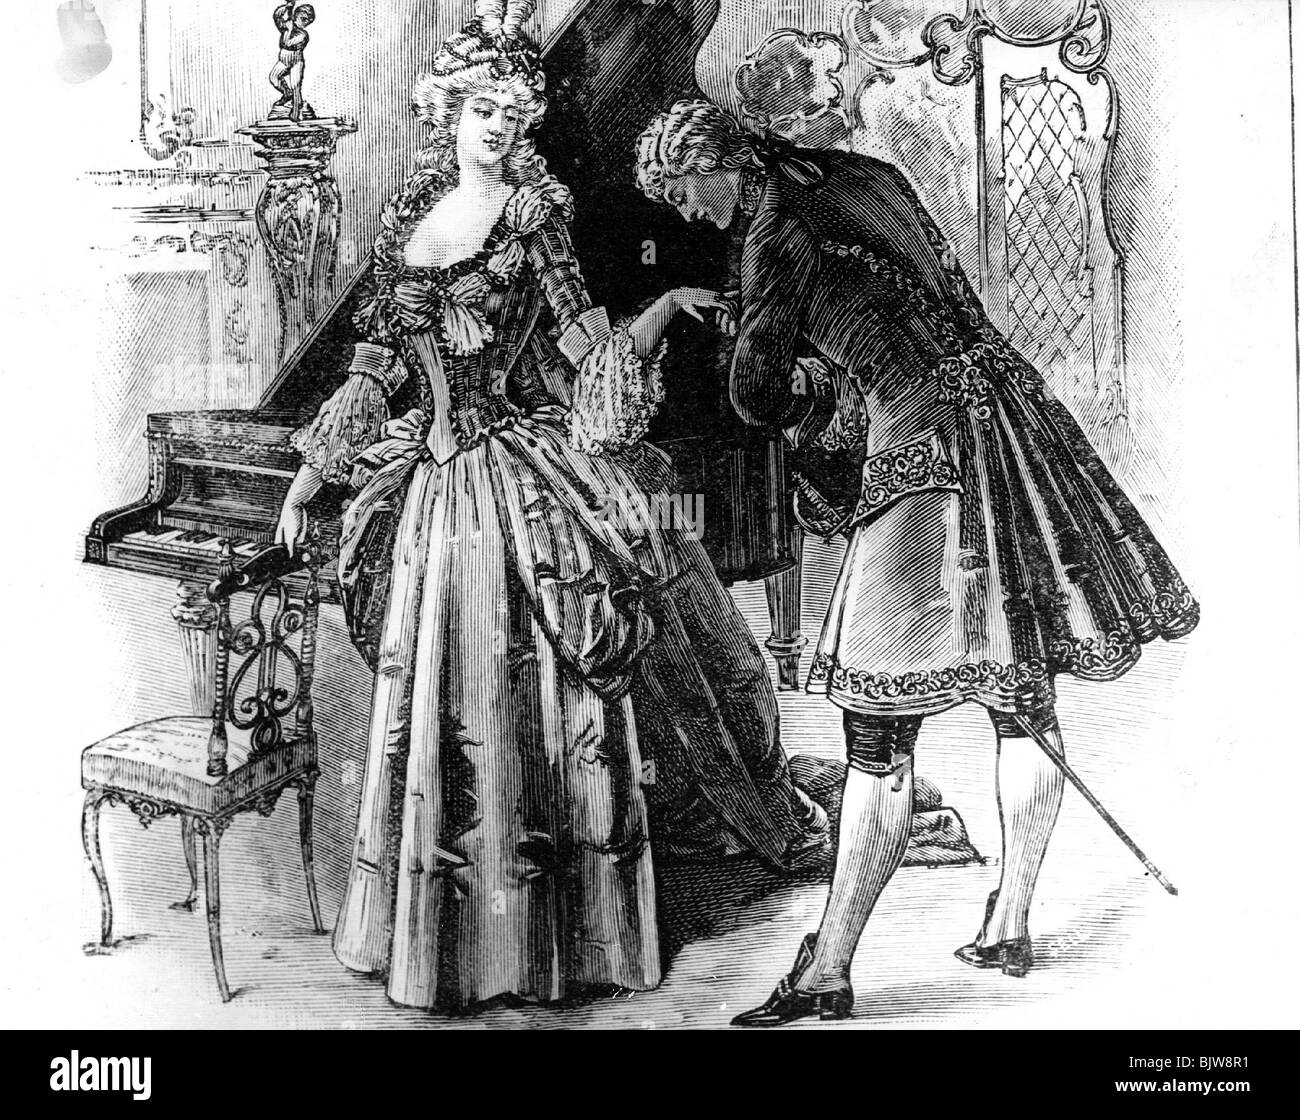 people, couples, lovers, kiss on the hand, late 18th century, fashion, historic, historical, piano, Stock Photo